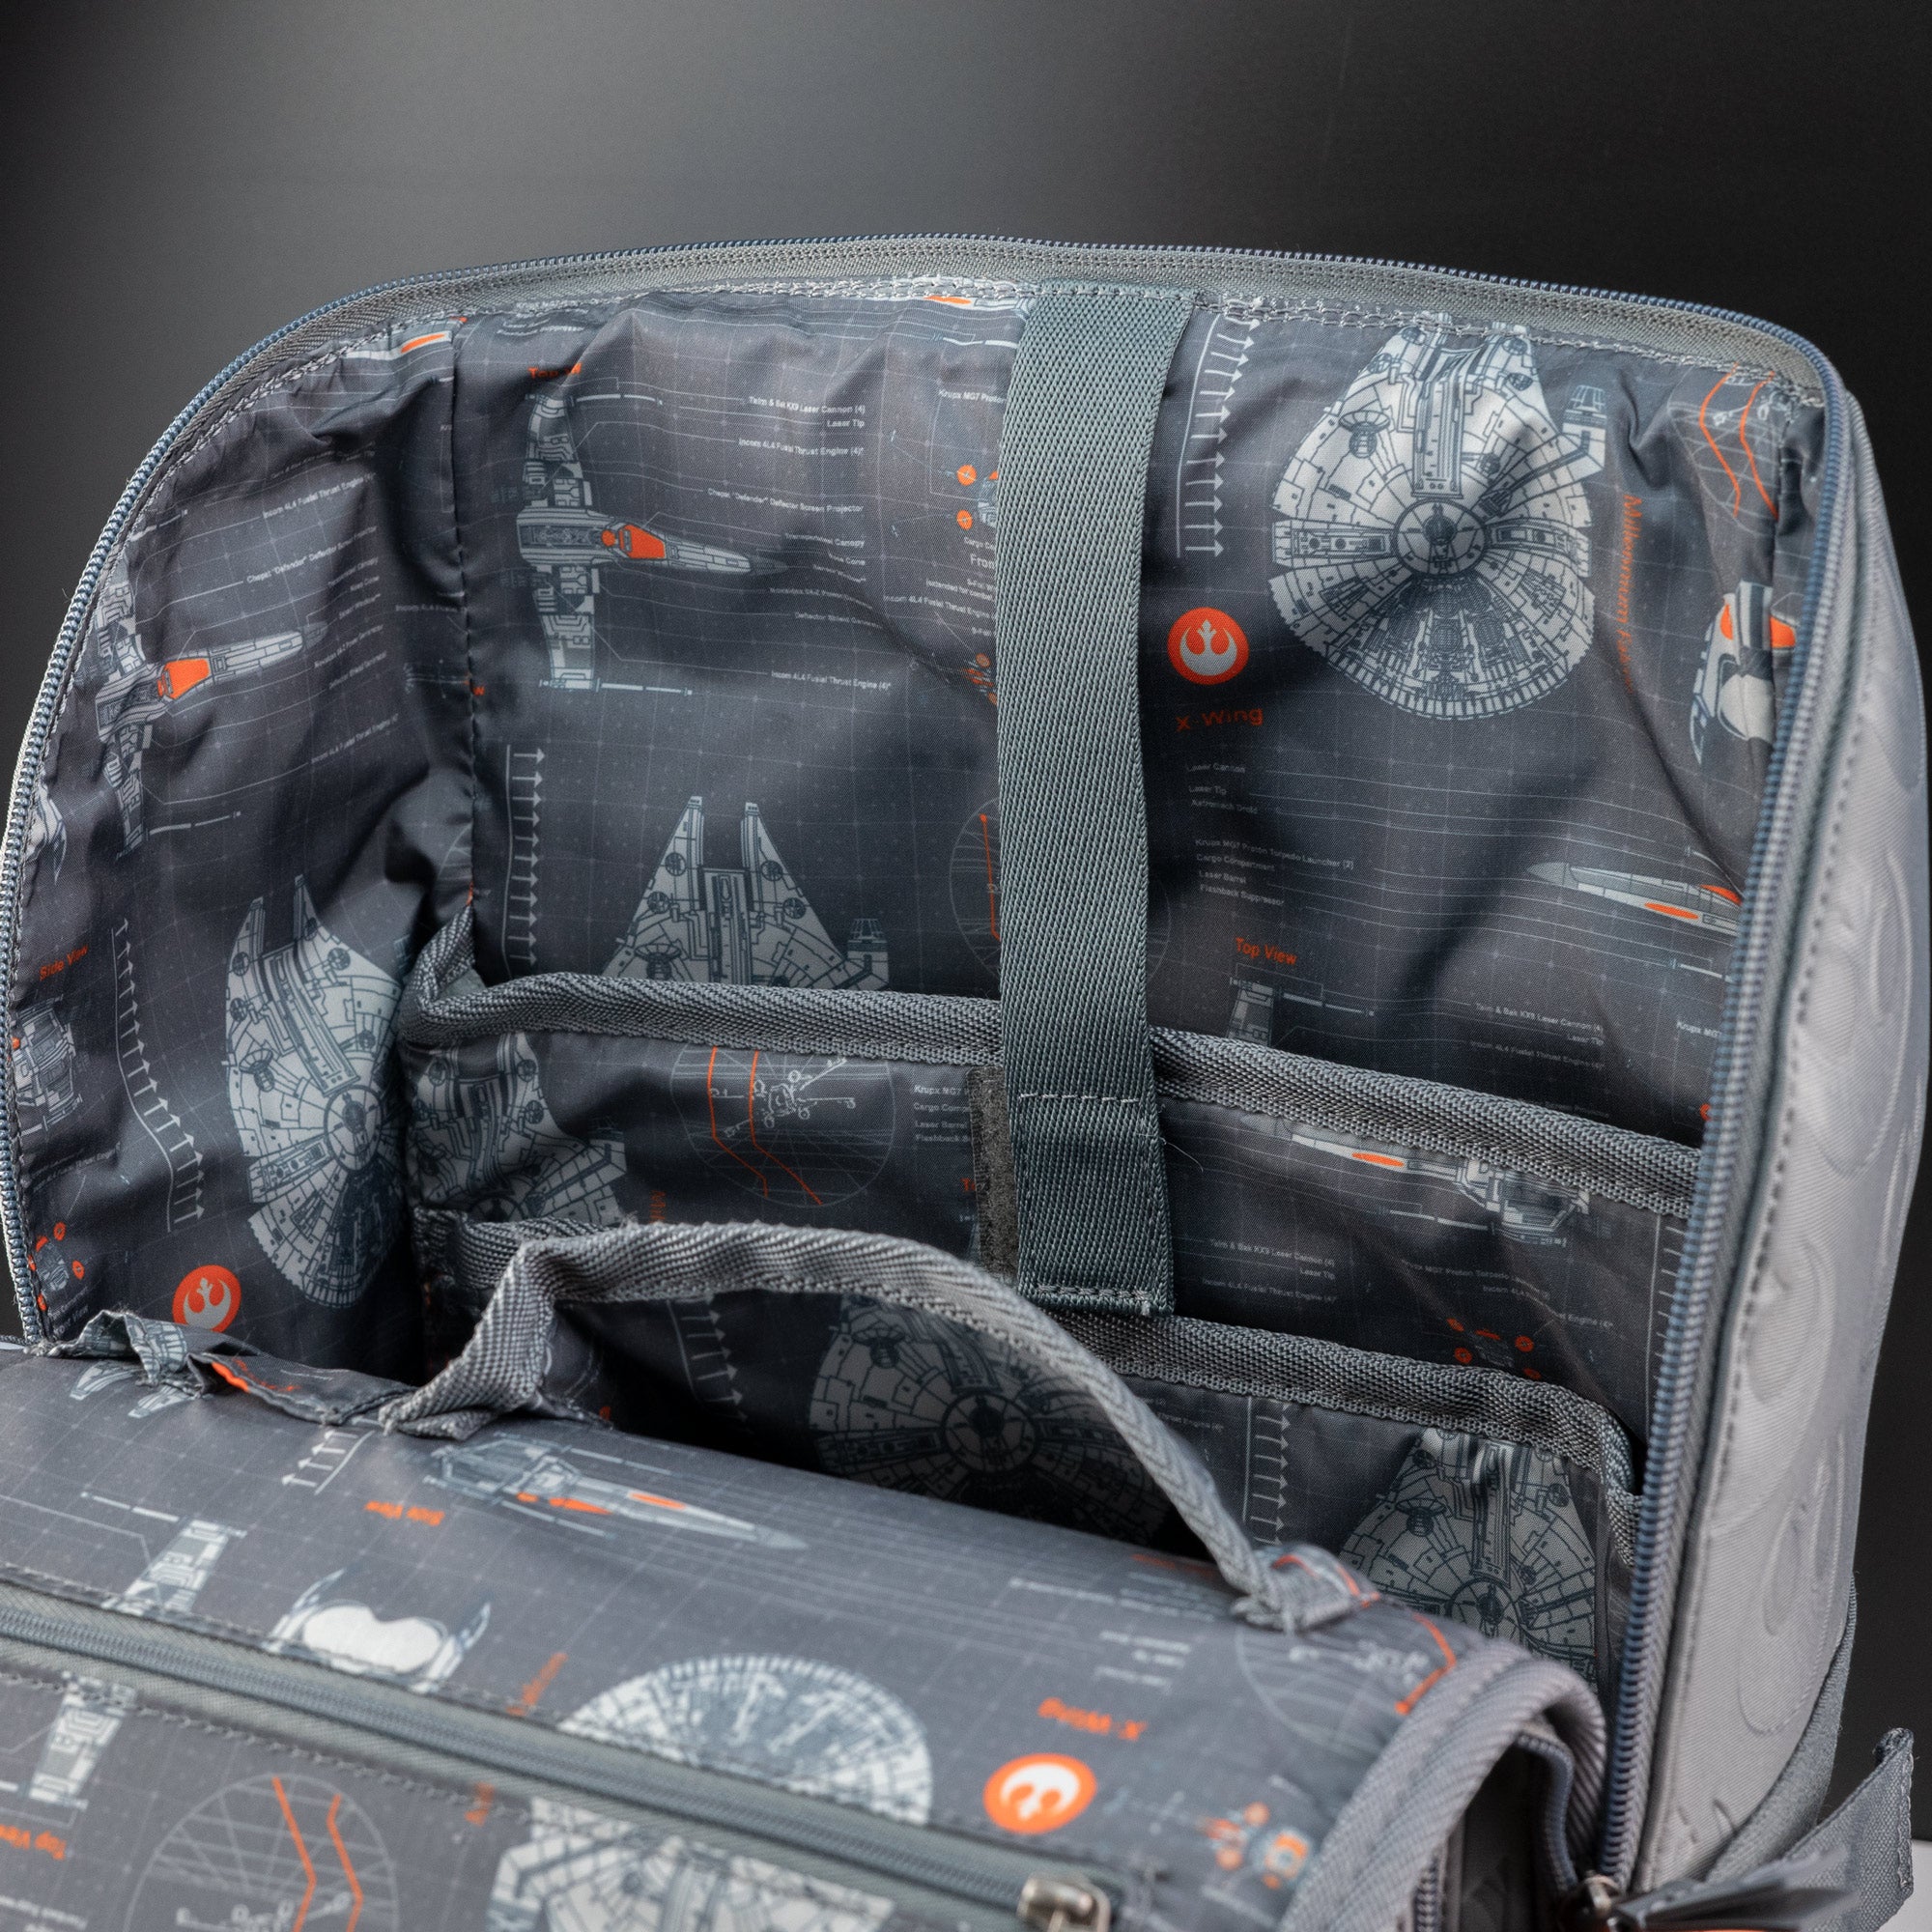 Loungefly Collectiv x Star Wars Rebel Alliance The Multi-Tasker Full Sized Backpack